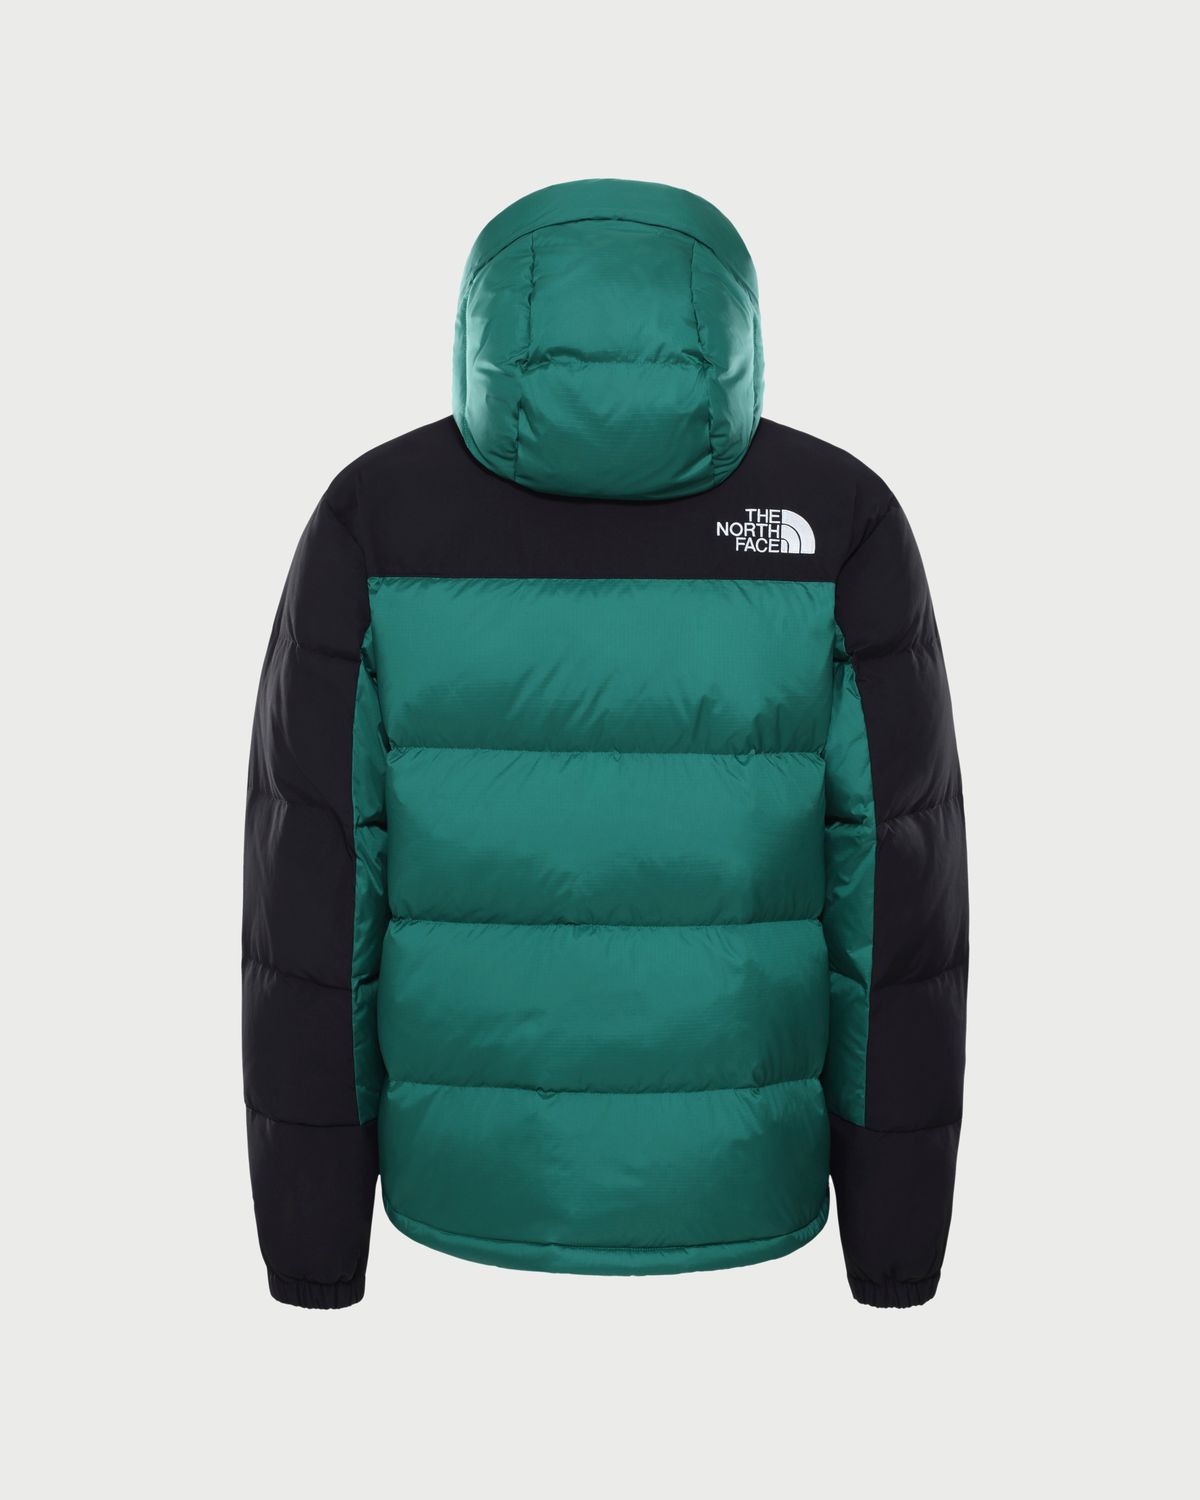 The North Face – Himalayan Down Jacket Peak Evergreen Unisex - Down Jackets - Green - Image 2